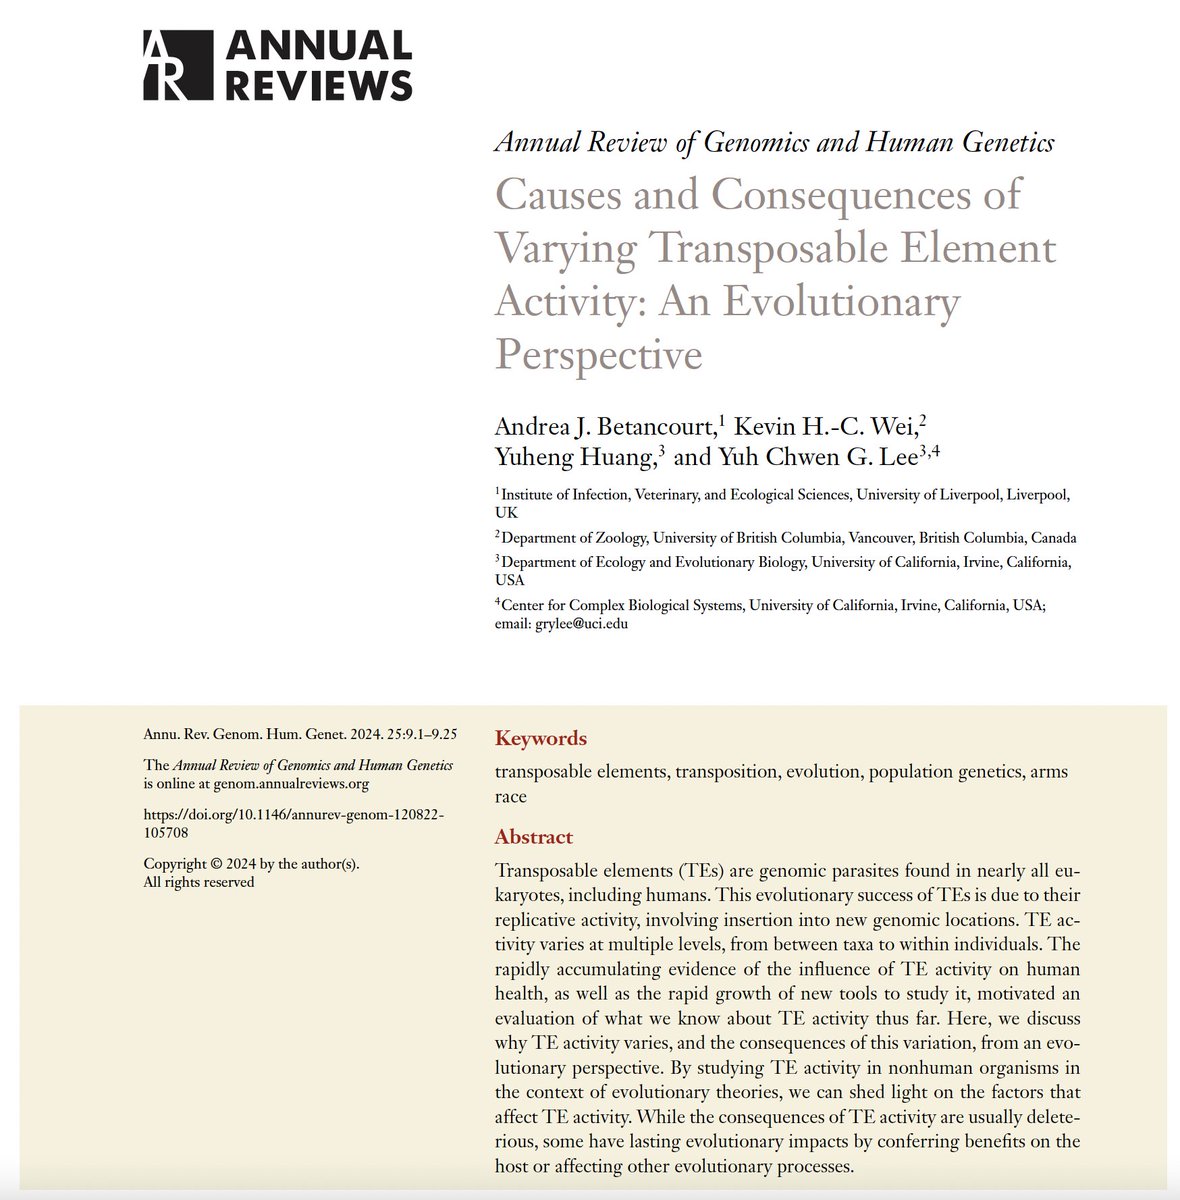 Why do transposons jump at highly variable rates, and what does that mean to host evolution? In this  @AnnualReviews, @texasrulz1, @kweiosis, Yuheng, and I integrated classic pop gen theories and new empirical data to explore this long-standing question. annualreviews.org/content/journa…